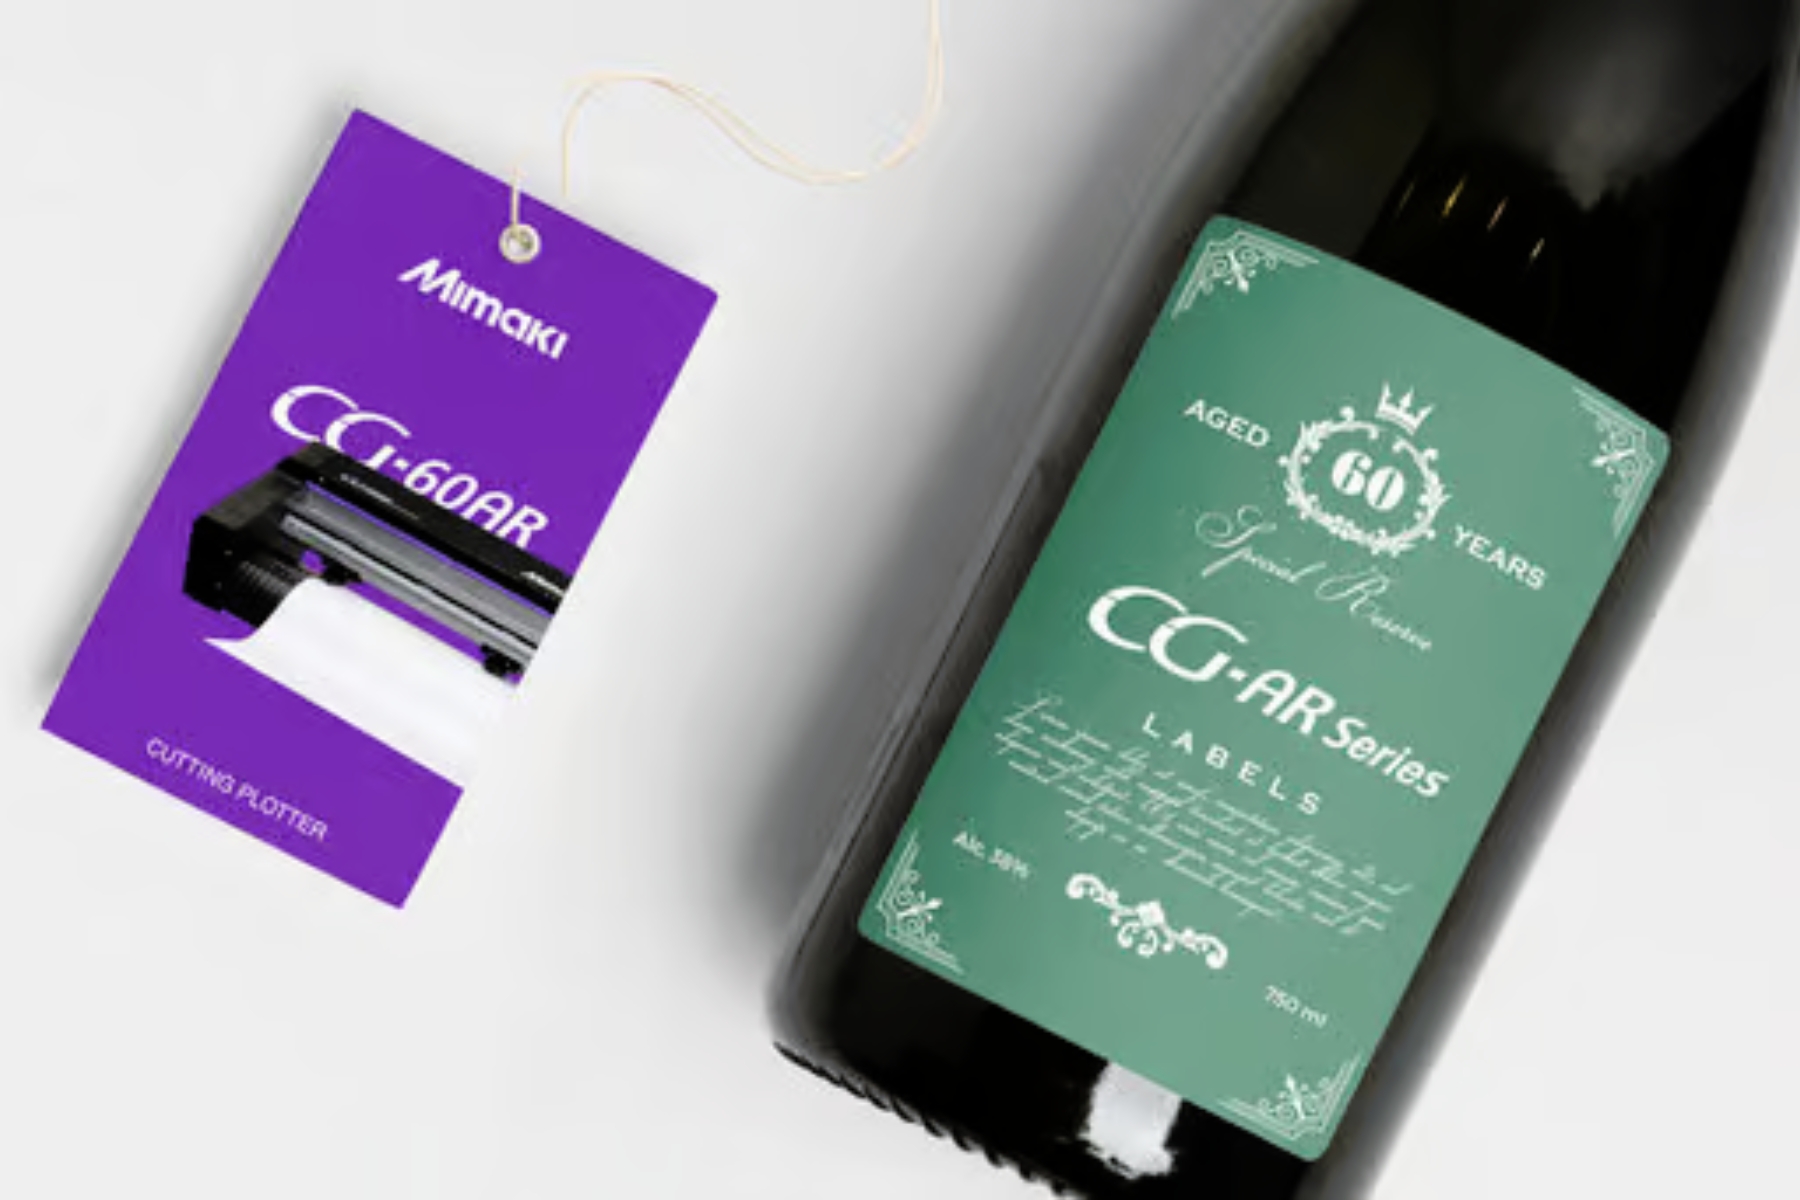 Mimaki printed and cut labels shown as a swing tag and a bottle label